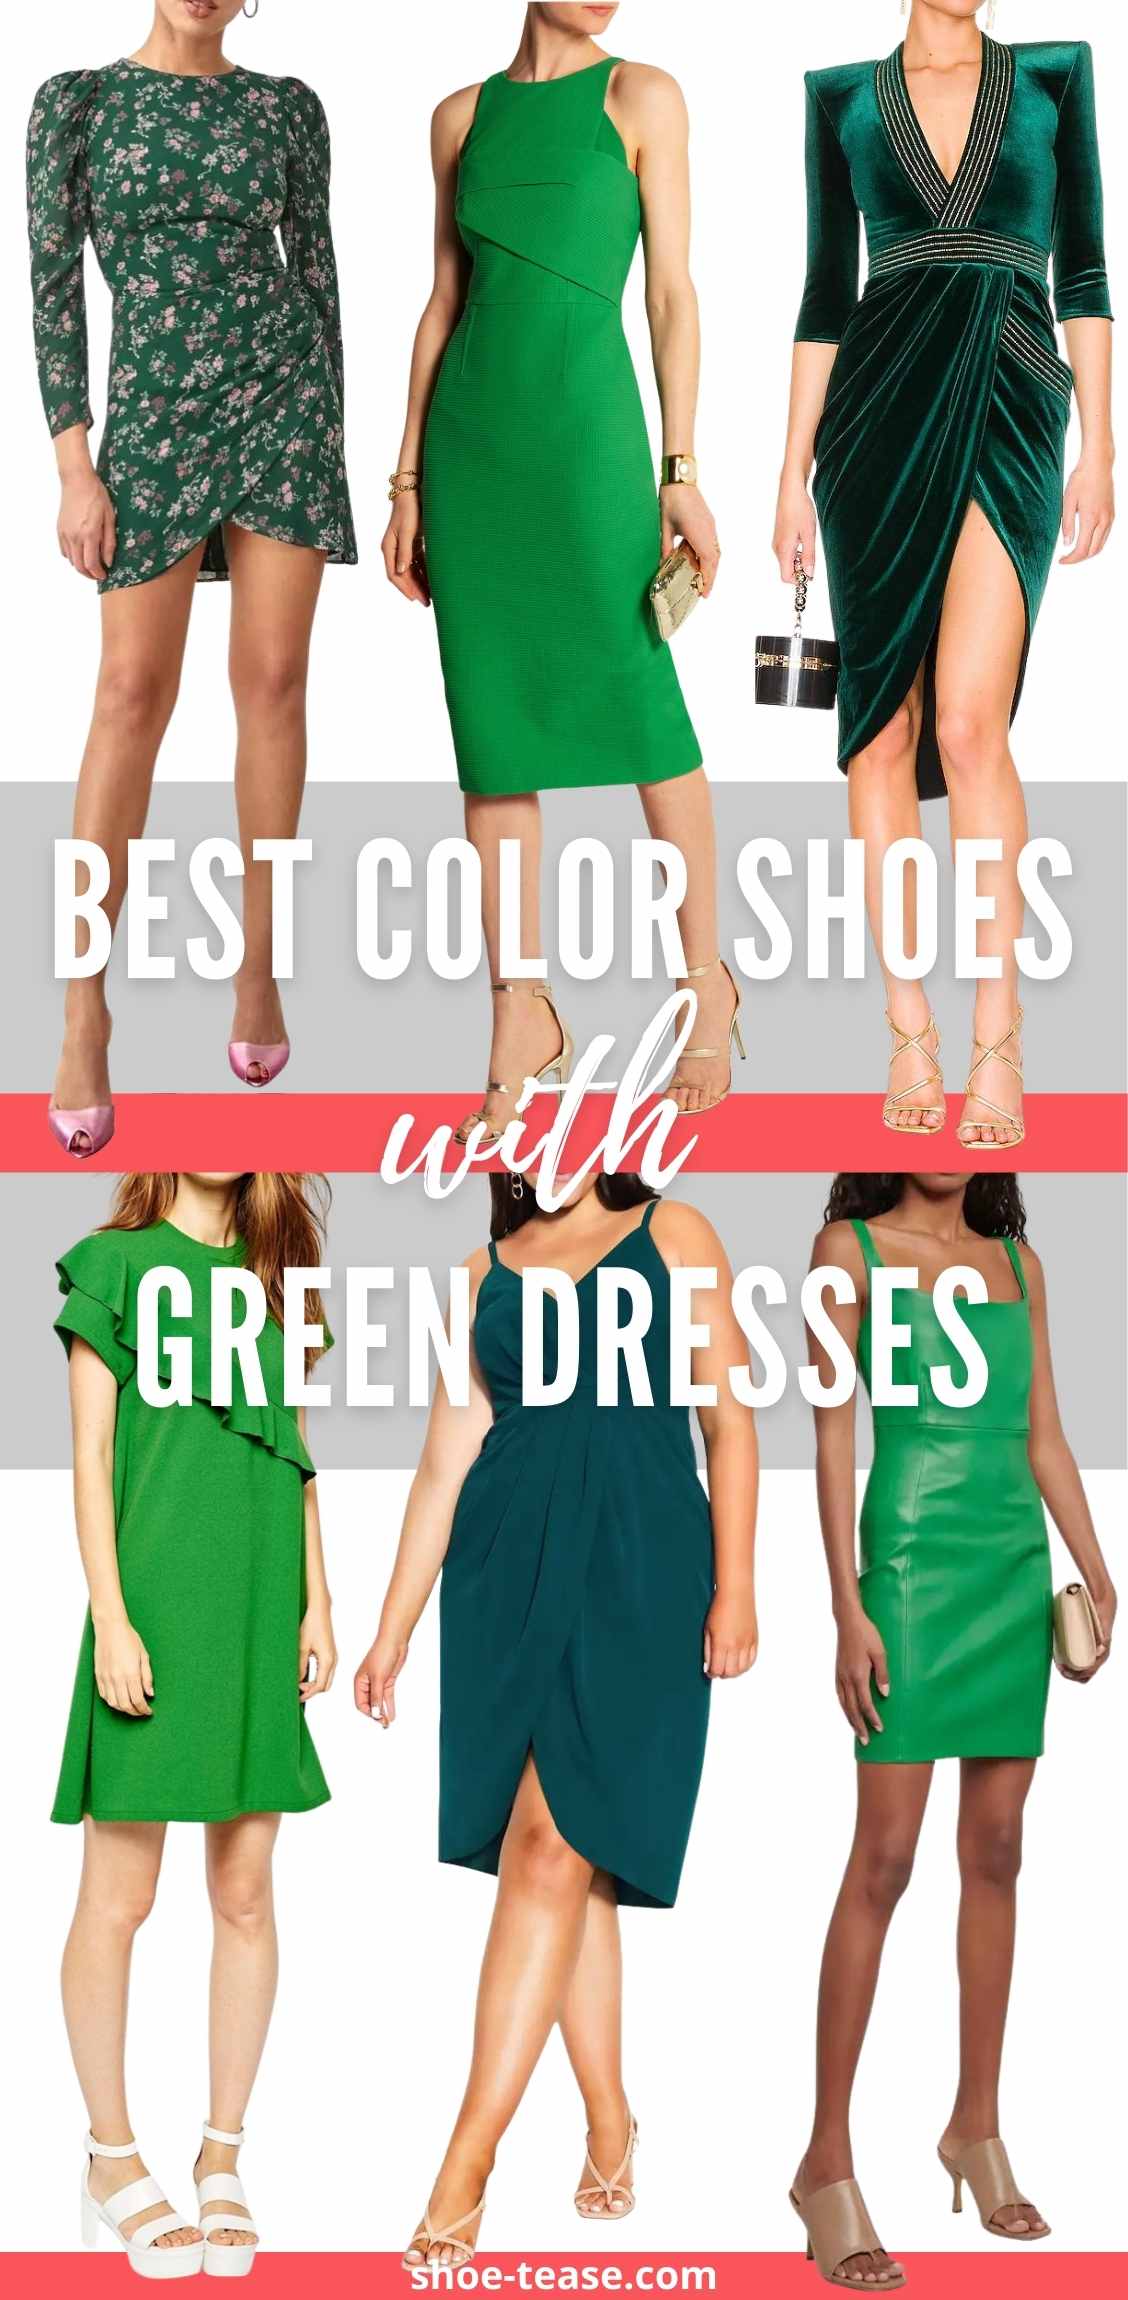 Green! 10 Best Shoes to Wear with Green Dresses & Emerald Outfits